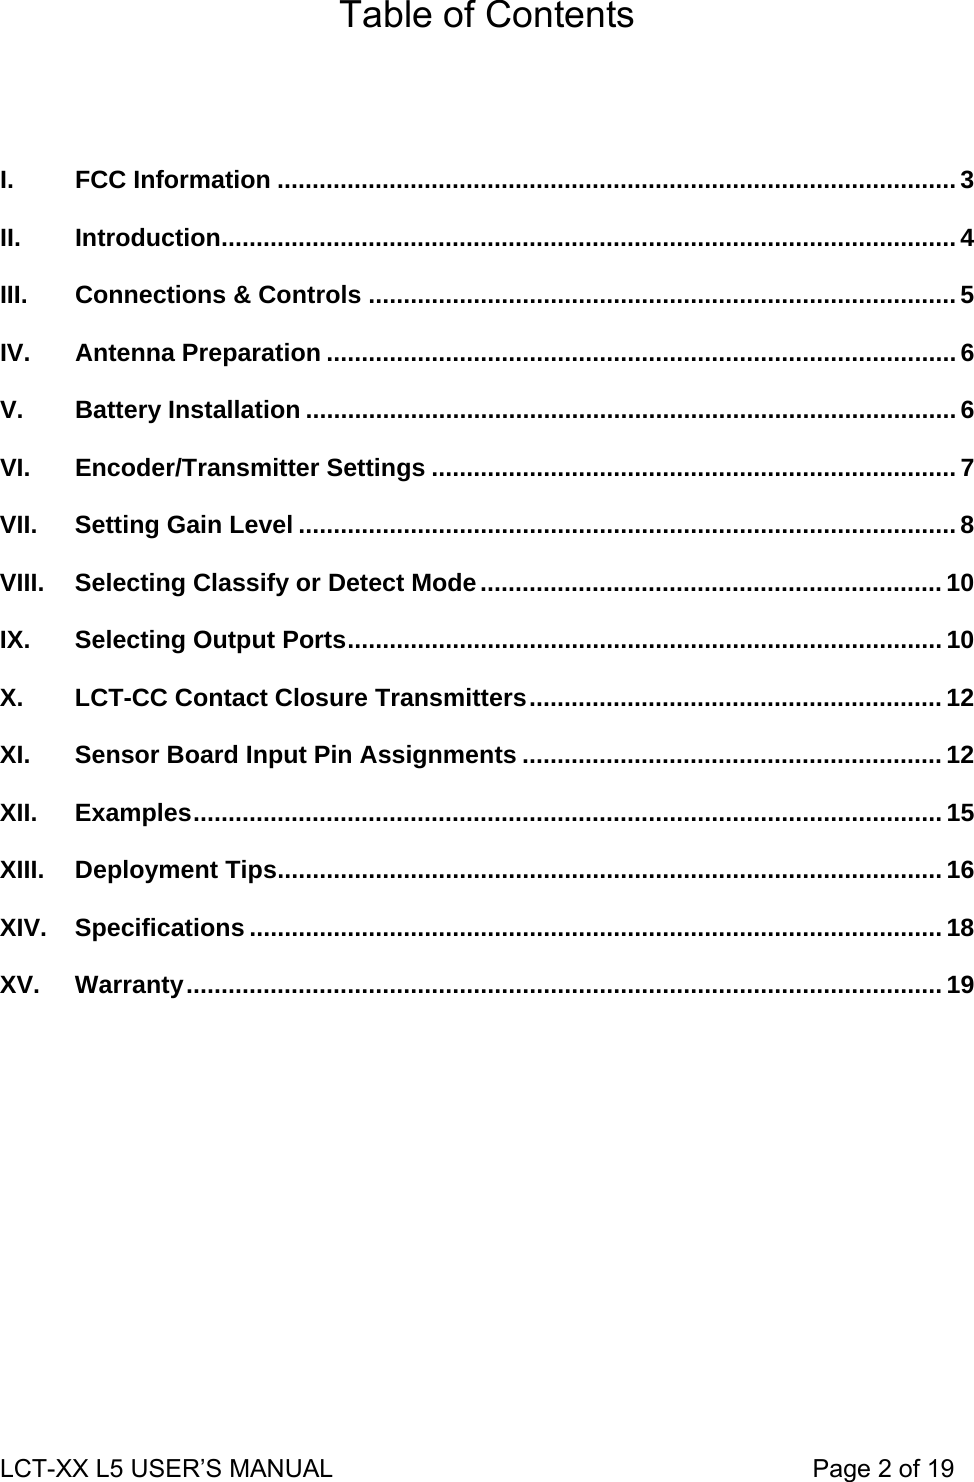 Table of Contents    I. FCC Information ................................................................................................. 3 II. Introduction......................................................................................................... 4 III. Connections &amp; Controls .................................................................................... 5 IV. Antenna Preparation .......................................................................................... 6 V. Battery Installation .............................................................................................6 VI. Encoder/Transmitter Settings ...........................................................................7 VII. Setting Gain Level .............................................................................................. 8 VIII. Selecting Classify or Detect Mode.................................................................. 10 IX. Selecting Output Ports..................................................................................... 10 X. LCT-CC Contact Closure Transmitters........................................................... 12 XI. Sensor Board Input Pin Assignments ............................................................ 12 XII. Examples........................................................................................................... 15 XIII. Deployment Tips............................................................................................... 16 XIV. Specifications ................................................................................................... 18 XV. Warranty............................................................................................................ 19  LCT-XX L5 USER’S MANUAL                                                                     Page 2 of 19  